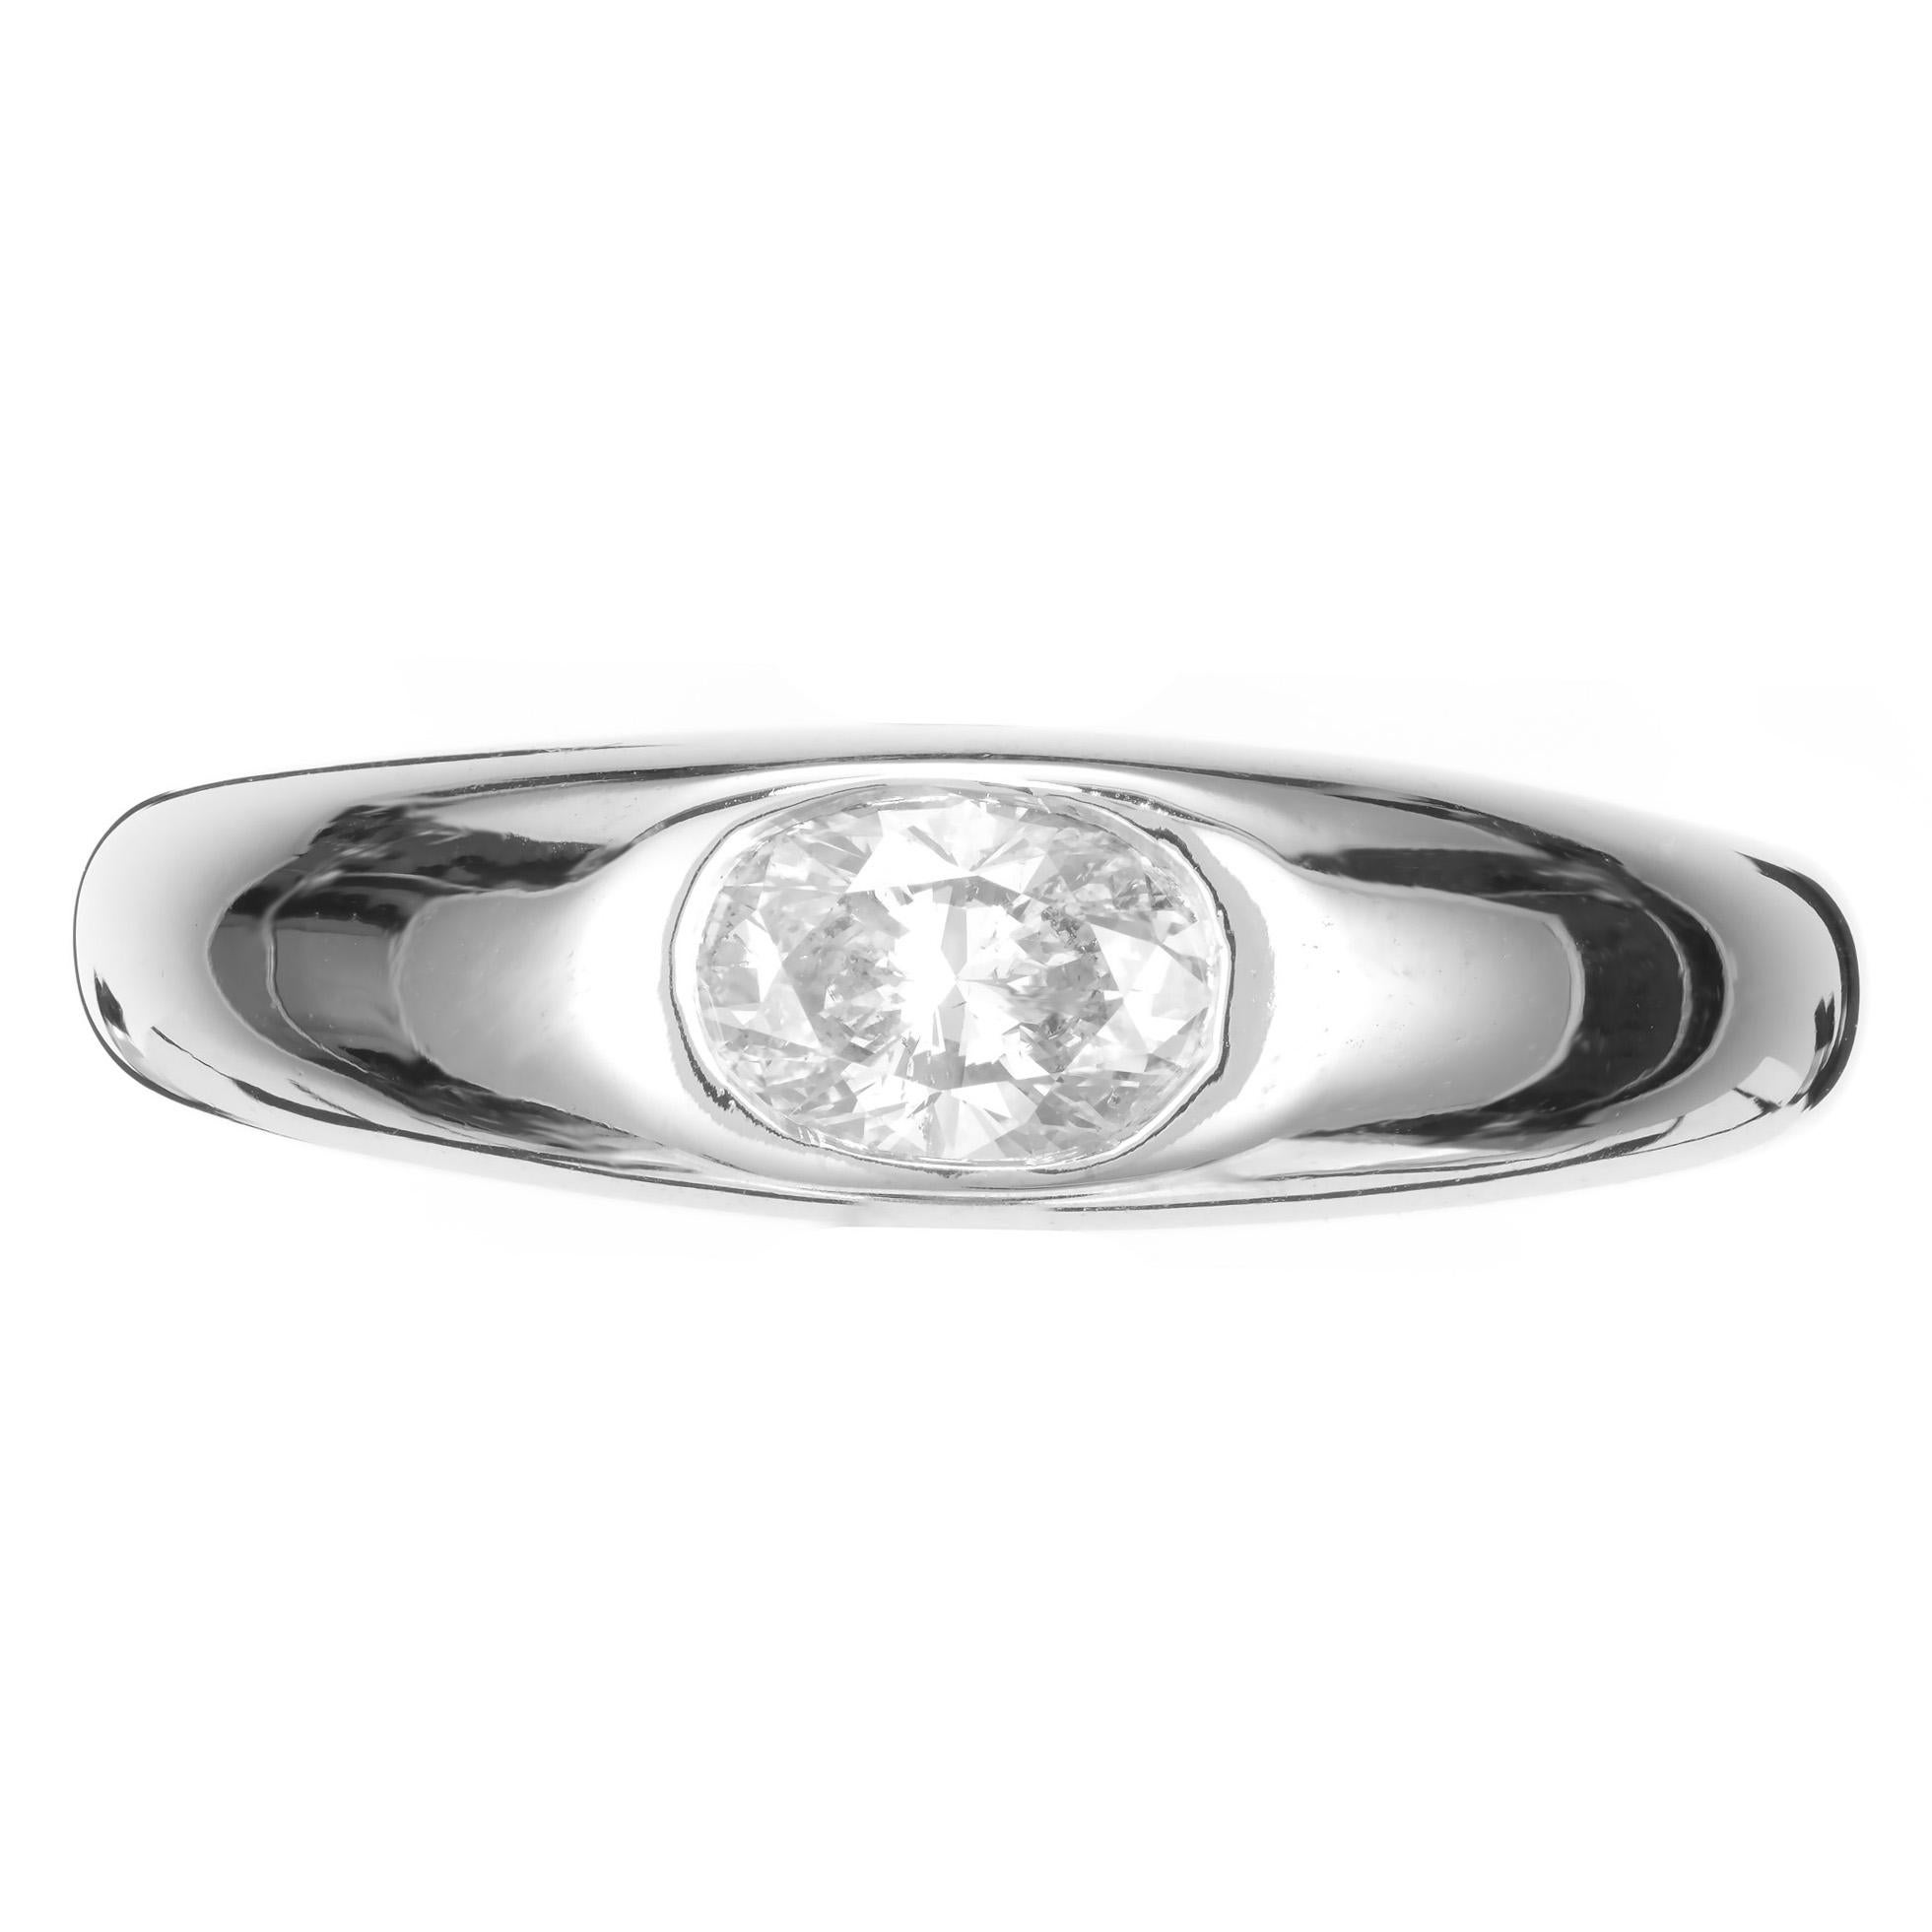 Custom made classic gypsy style diamond unisex ring. Oval cut diamond center stone in a 14k white gold setting. This ring can be made for any size and shape stone, in gold or platinum. Designed and crafted in the Peter Suchy Workshop.

1 oval cut